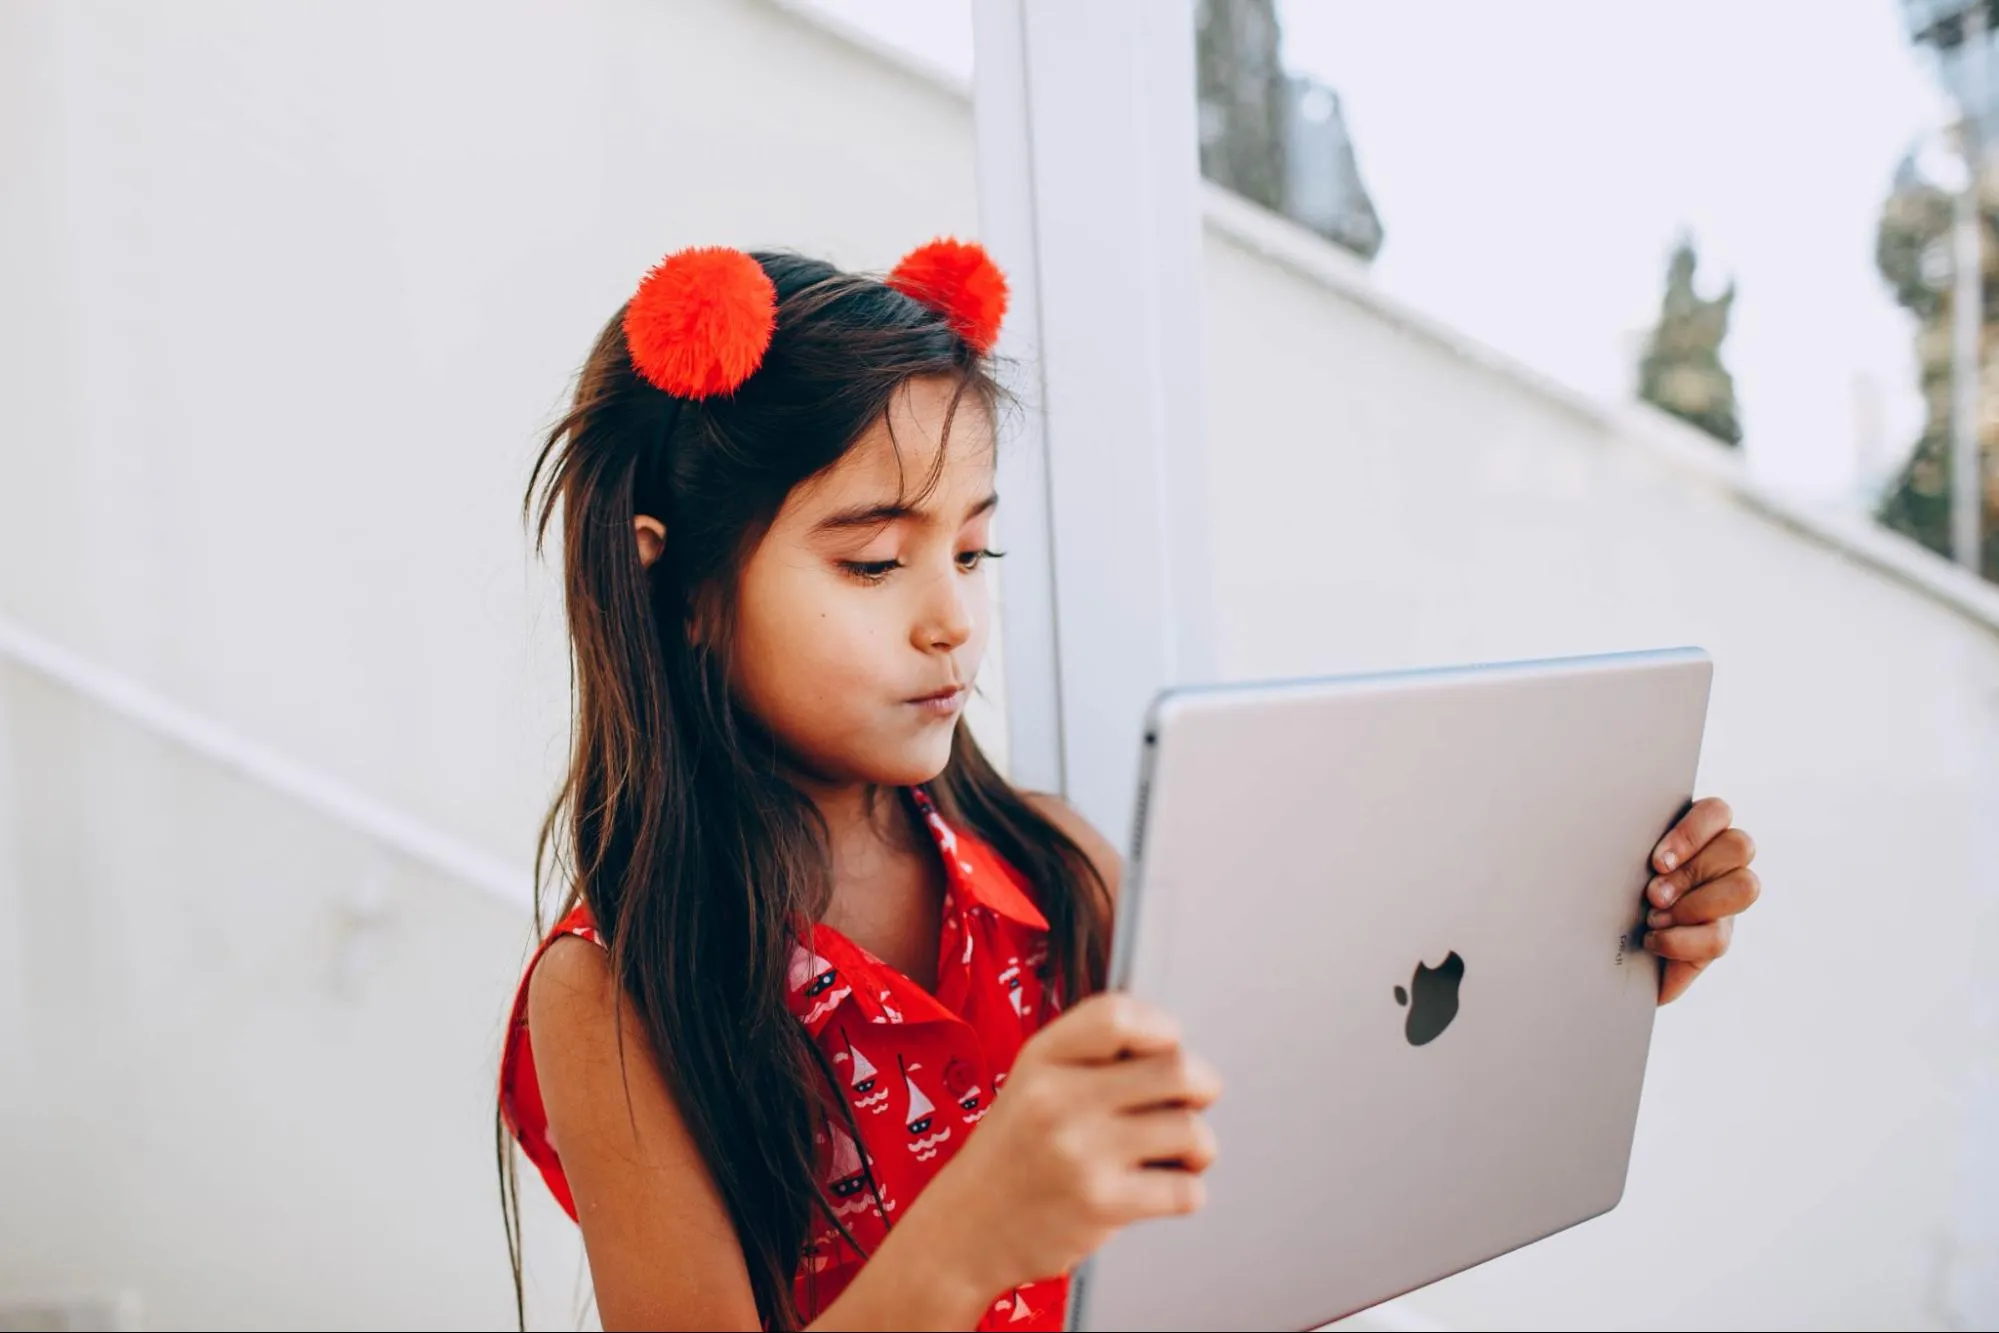 How to Promote Healthy Tech Habits for Children